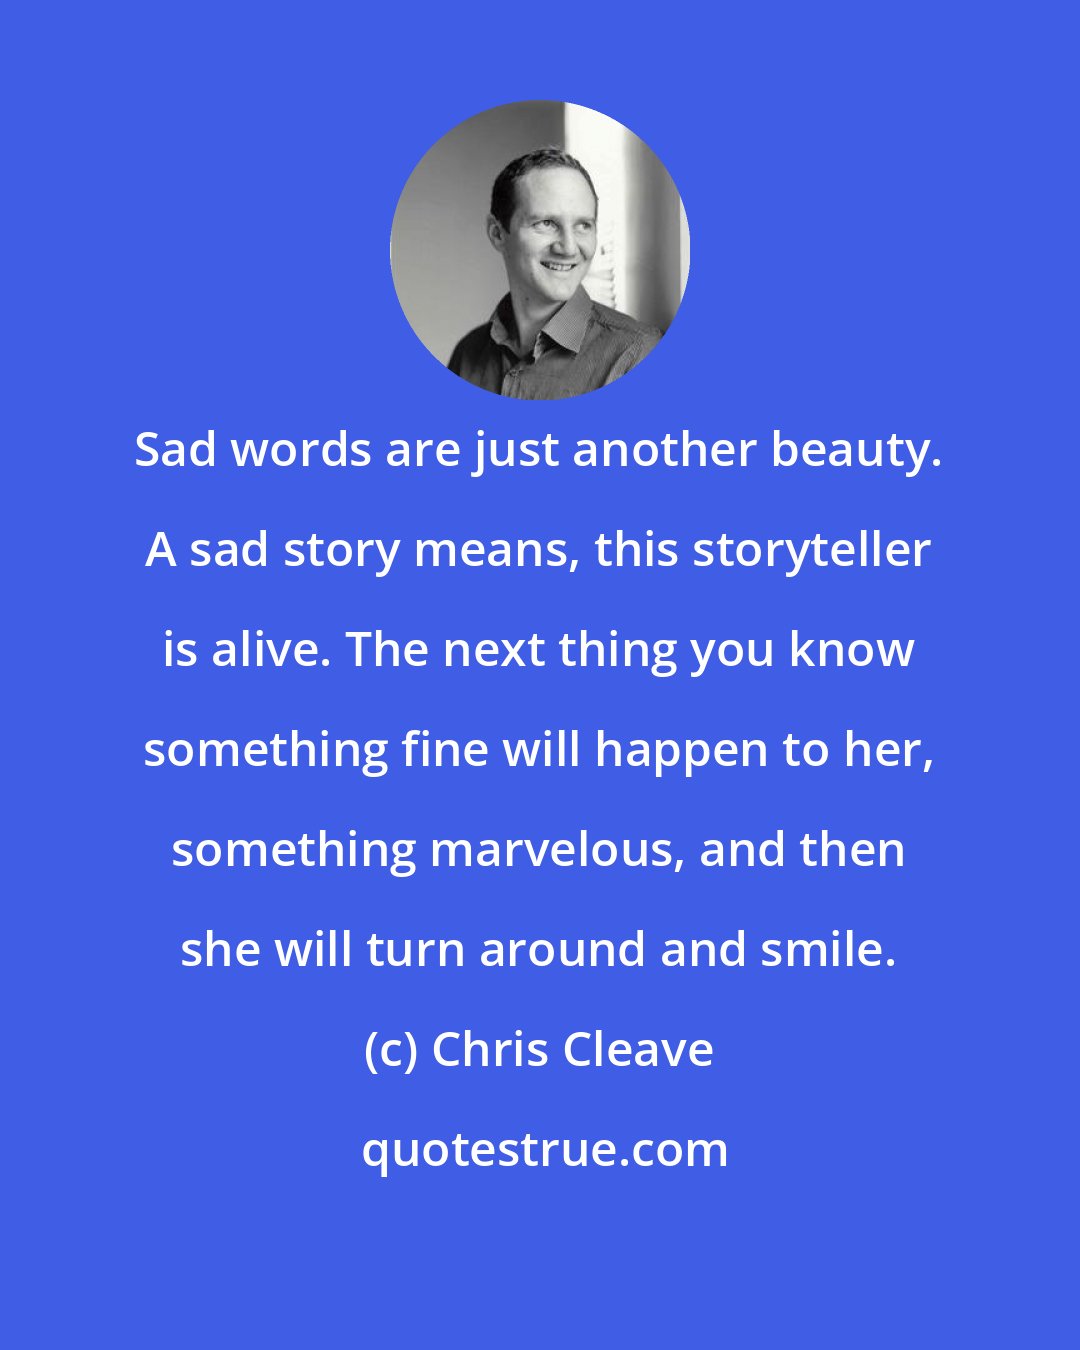 Chris Cleave: Sad words are just another beauty. A sad story means, this storyteller is alive. The next thing you know something fine will happen to her, something marvelous, and then she will turn around and smile.